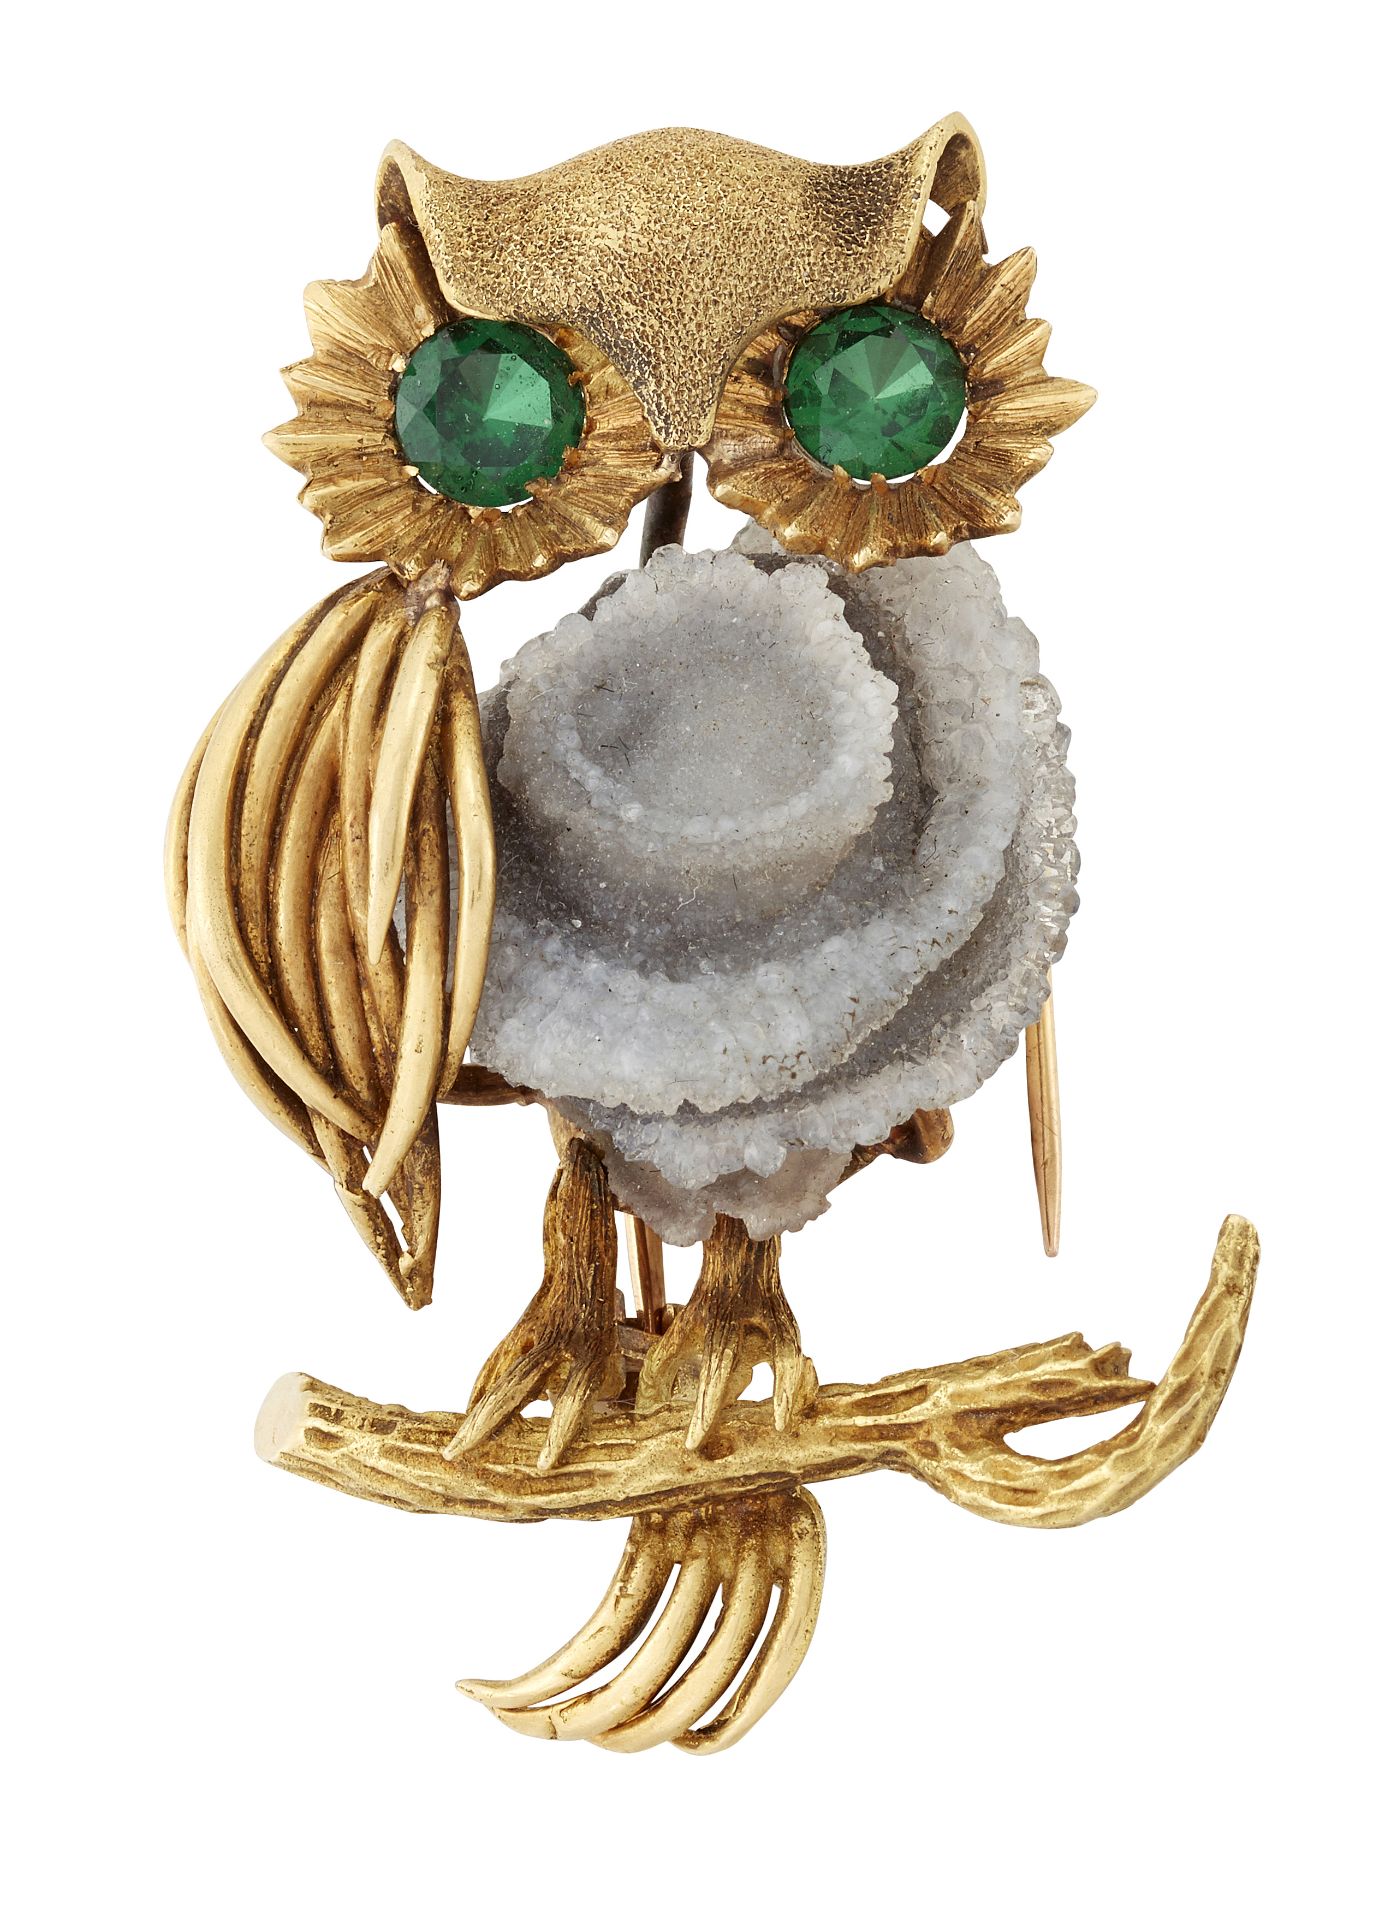 A 1970s DRUZY AGATE AND PASTE NOVELTY OWL BROOCH